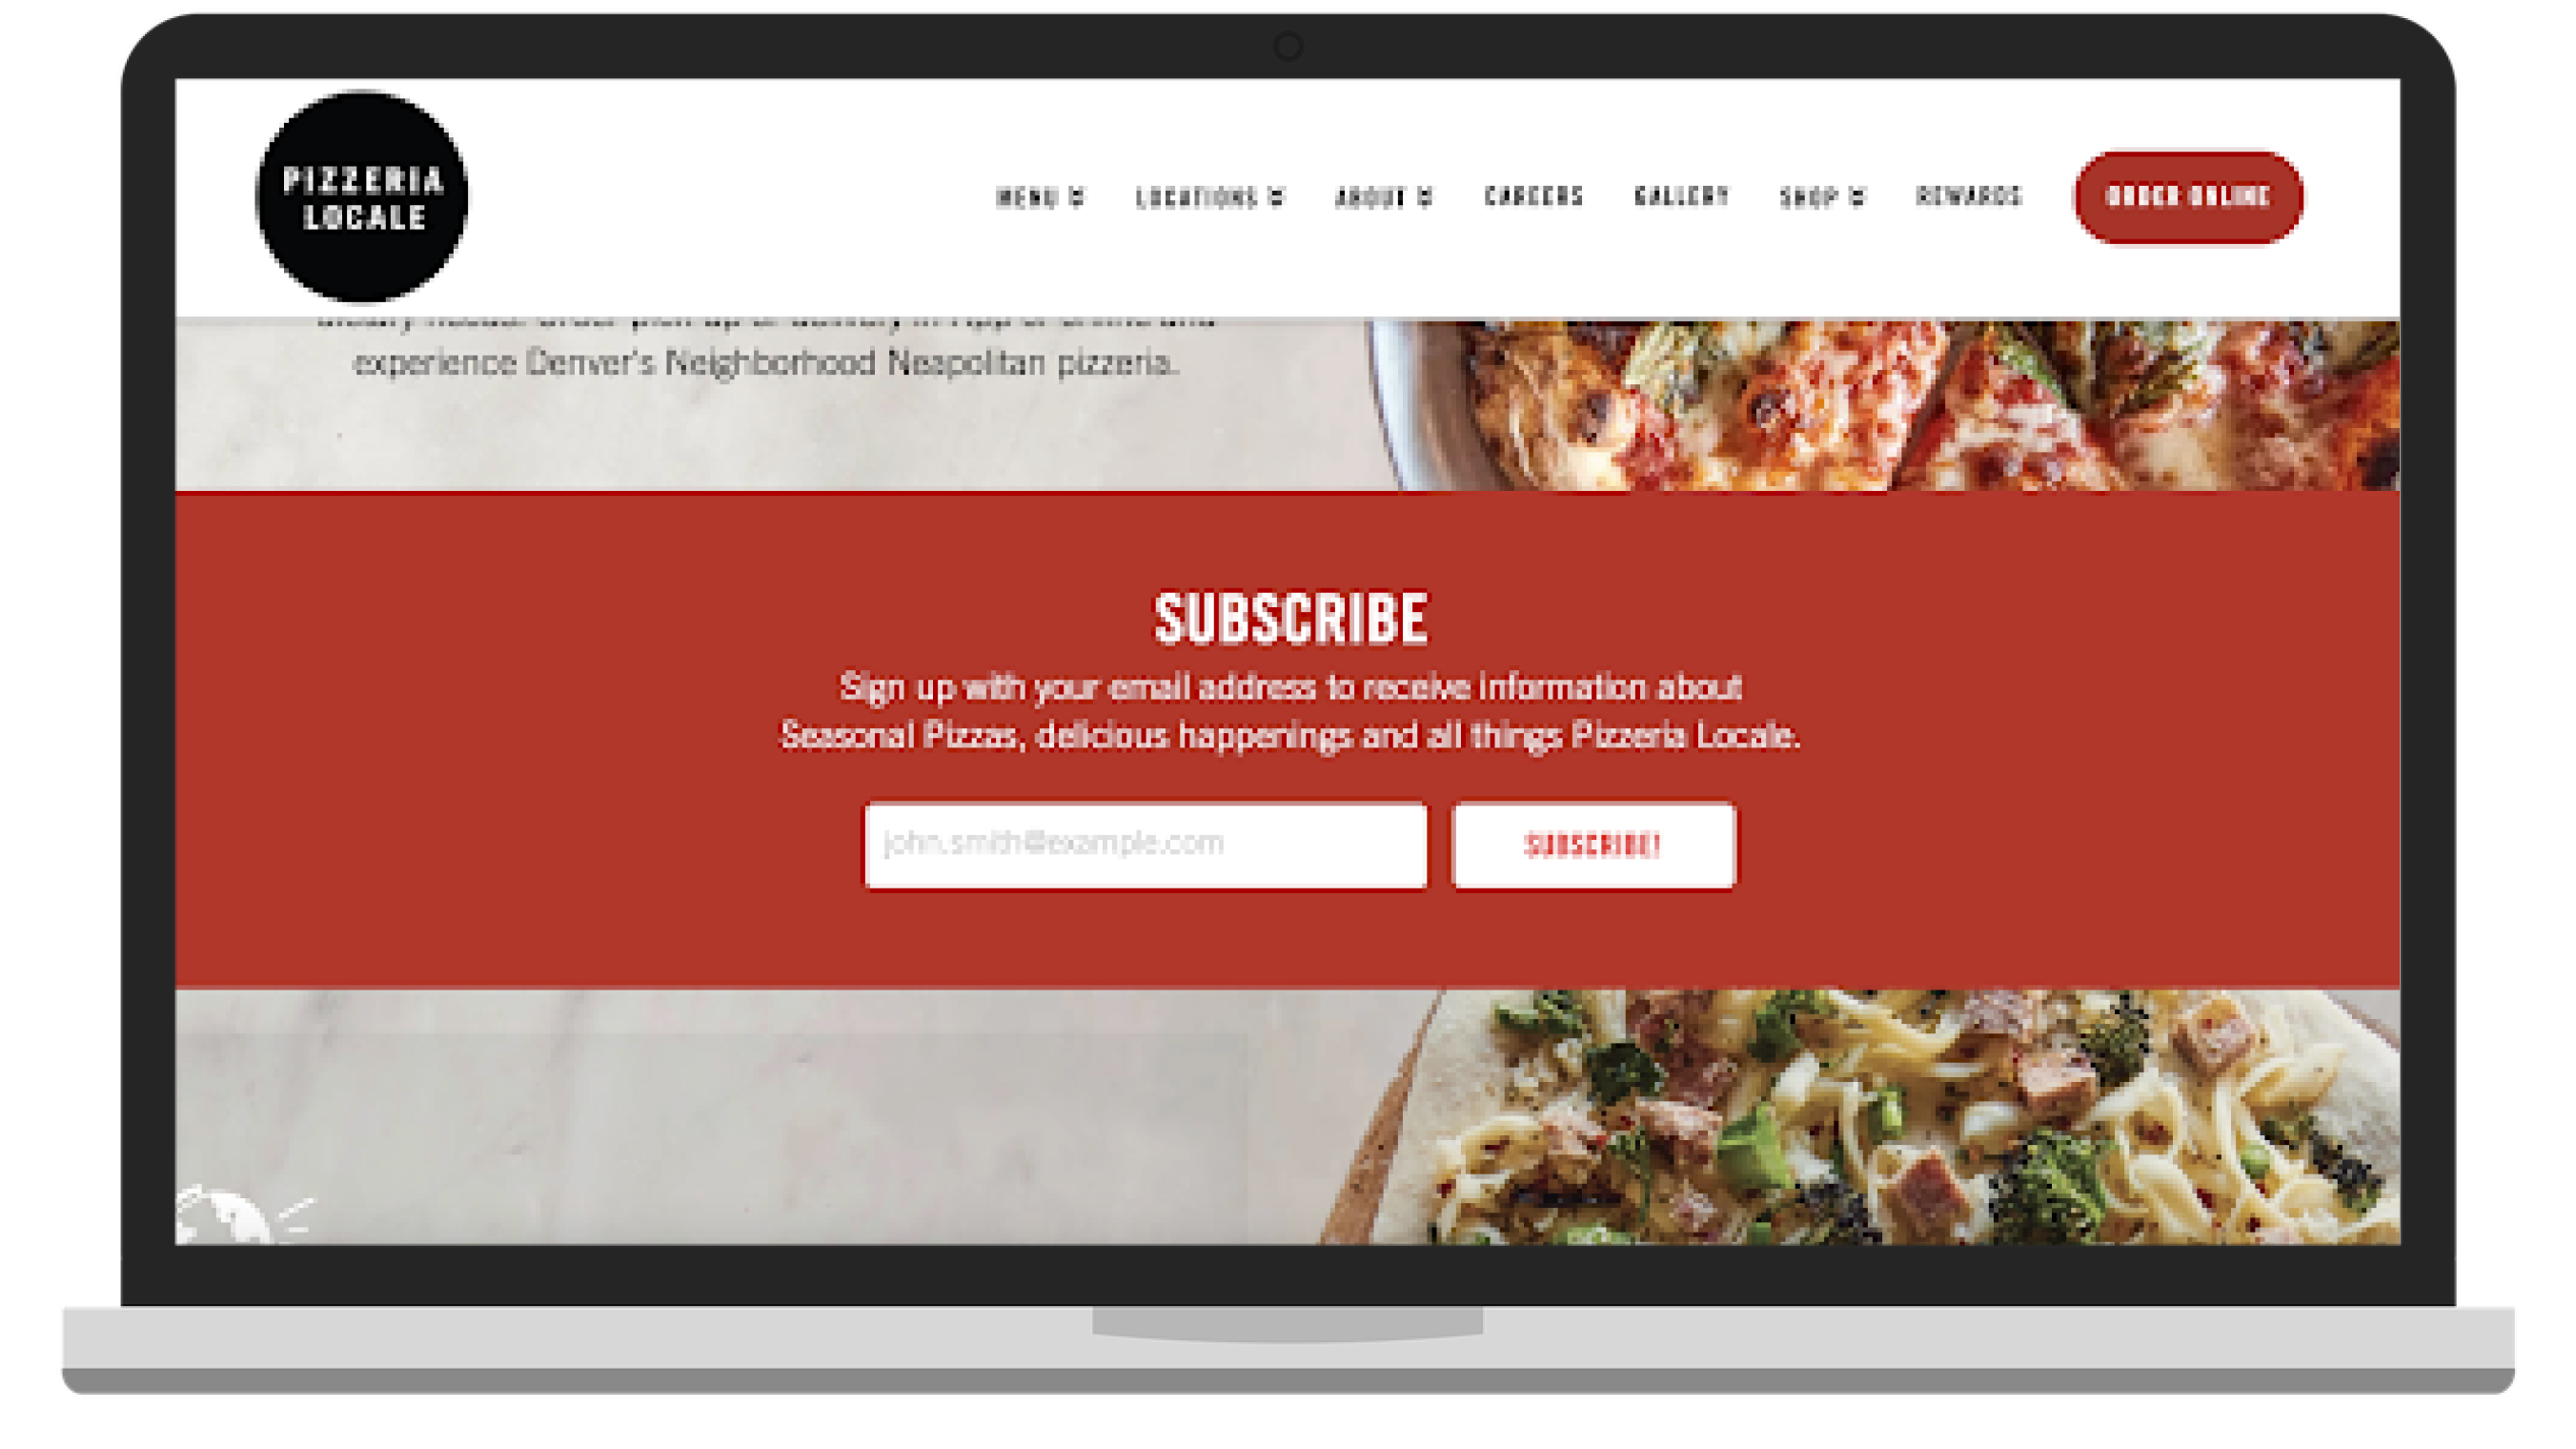 Example of Pizzeria Locale and their email subscription.